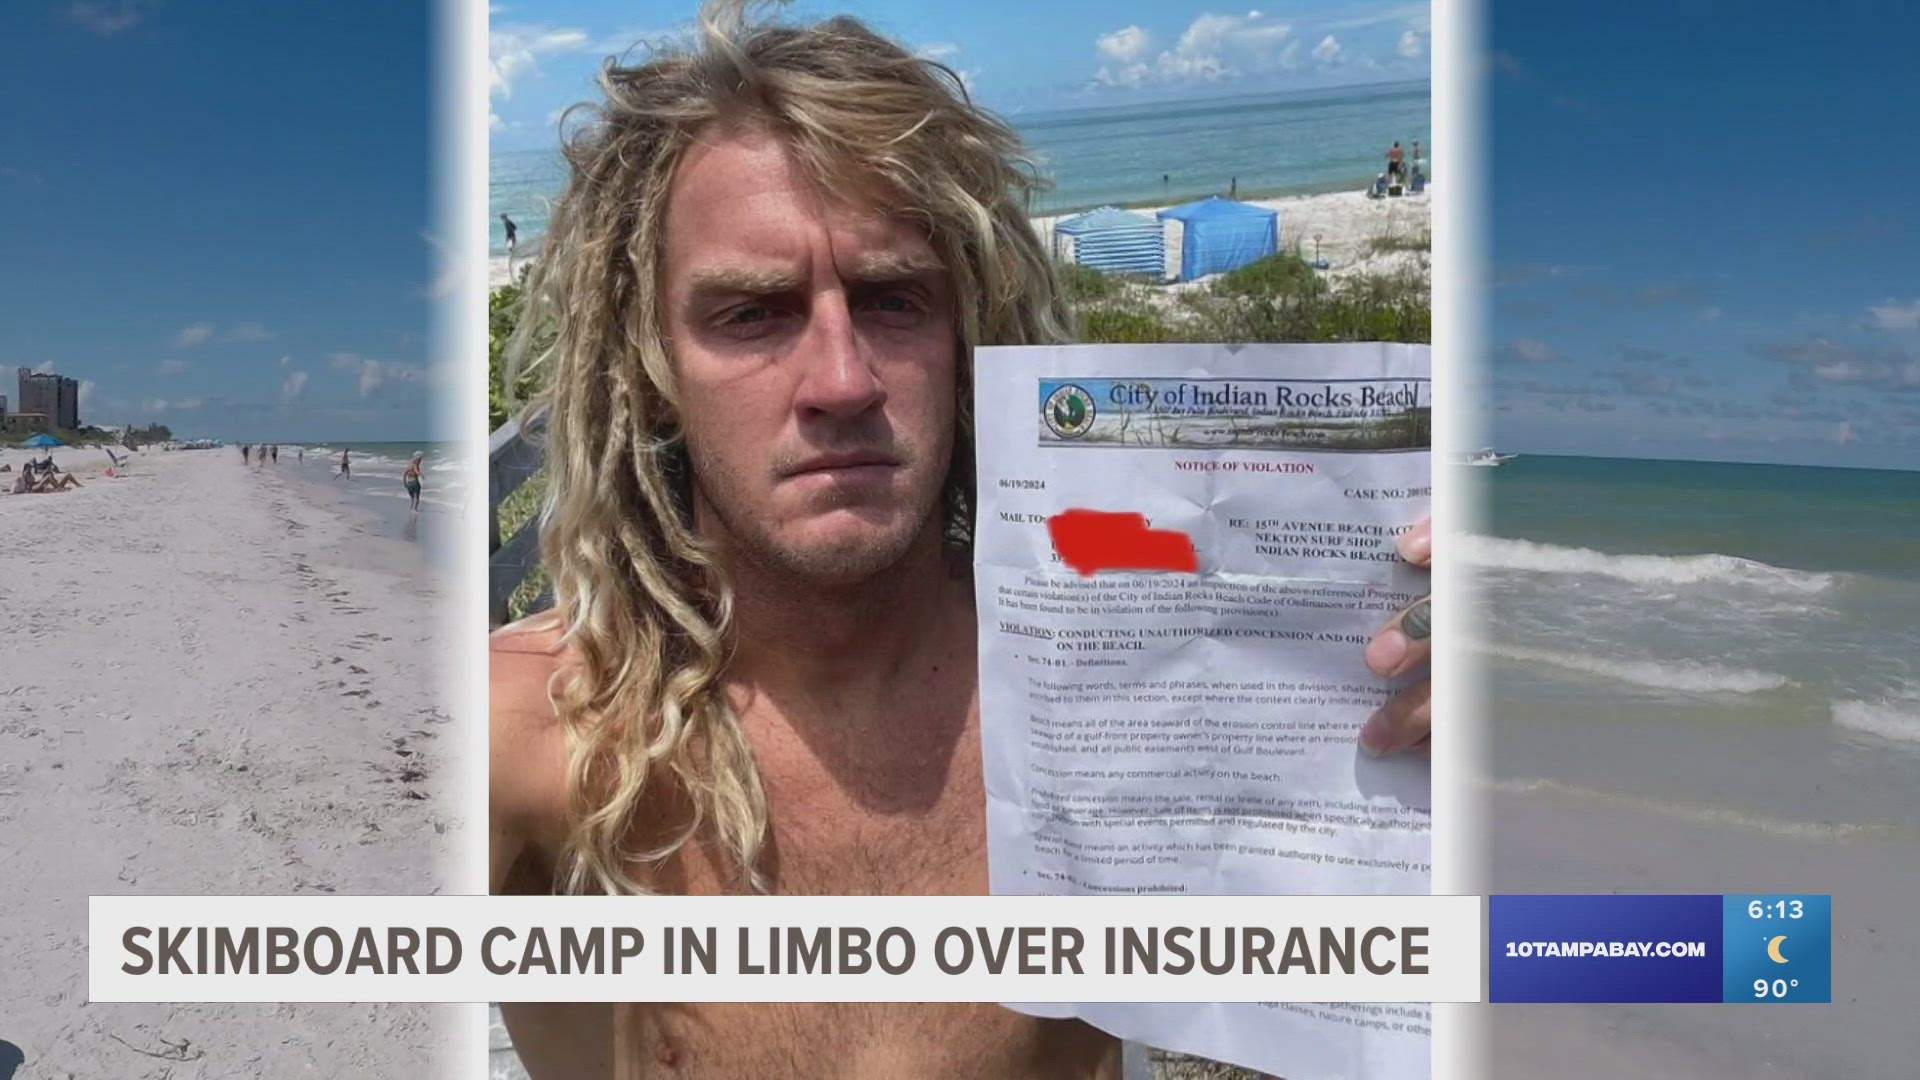 Joogsquad Skim Camp owner Jack Tenney said he's been operating informally, a few hours a few days a week, for 15 years. Now, an insurance requirement could sink him.